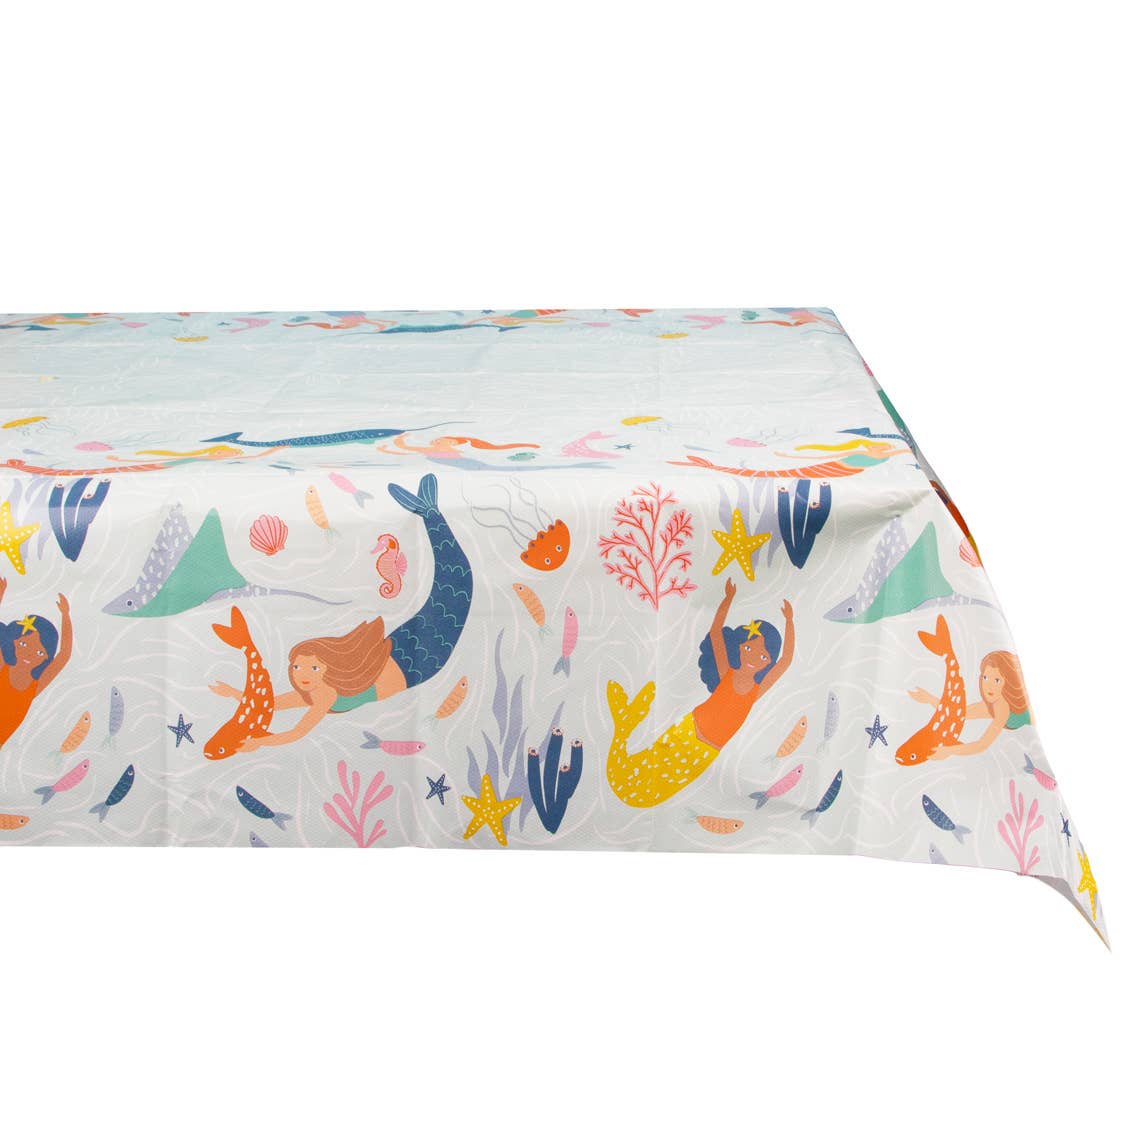 Mermaid Party Tablecloth